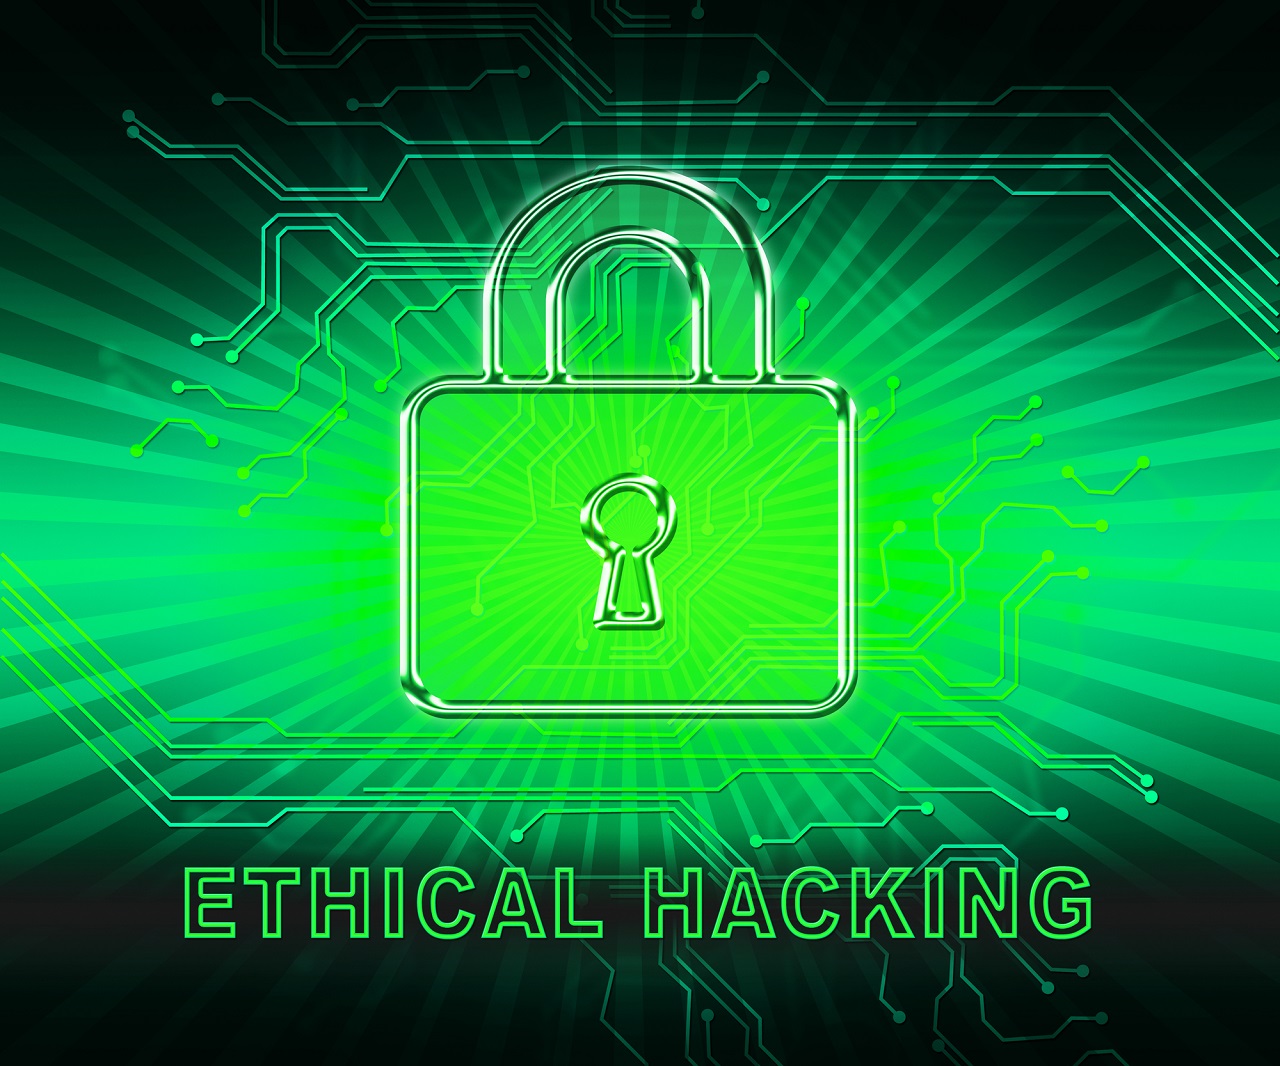 Ethical hacking